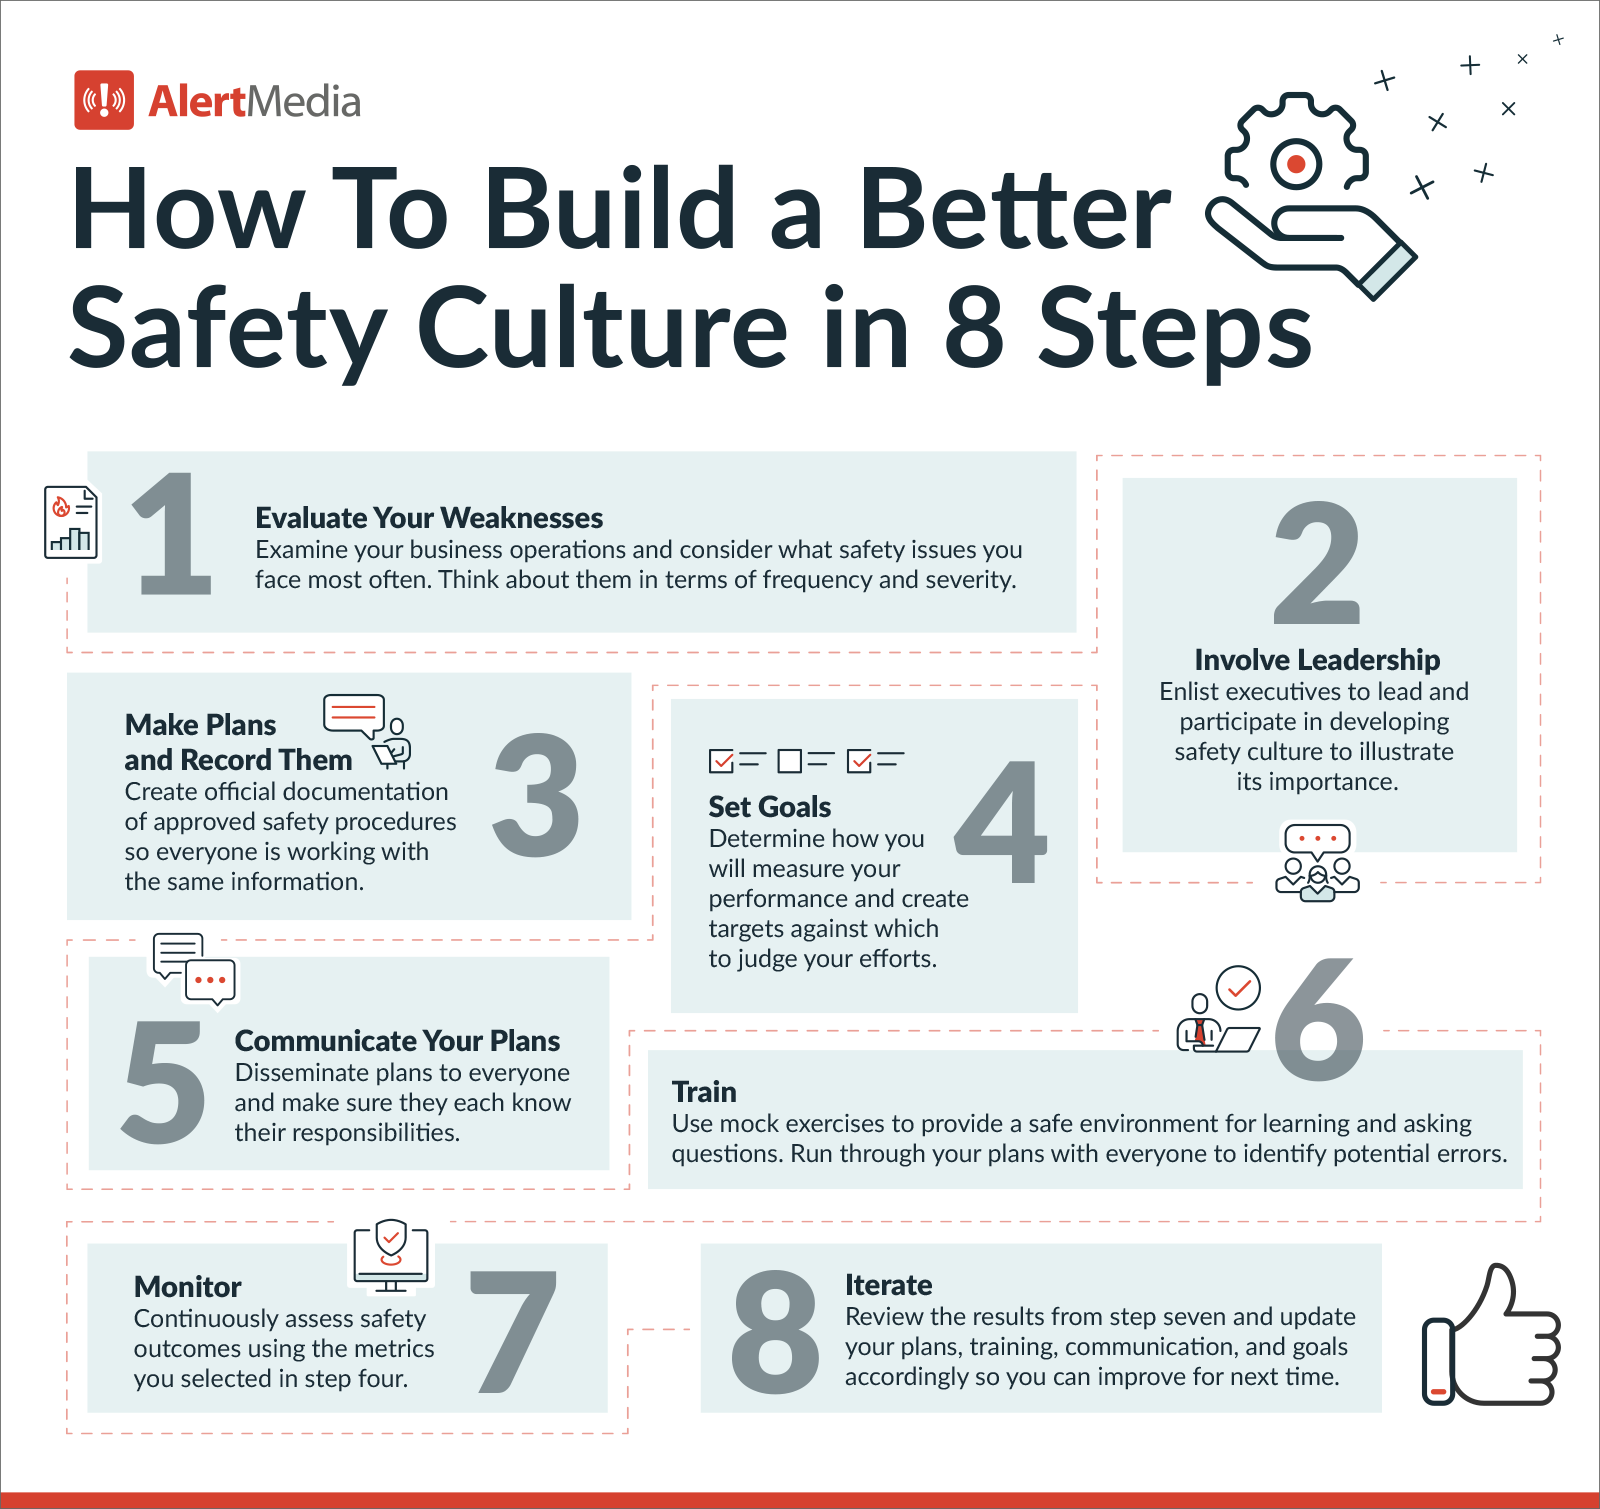 infographic showing how to build a better safety culture in 8 steps